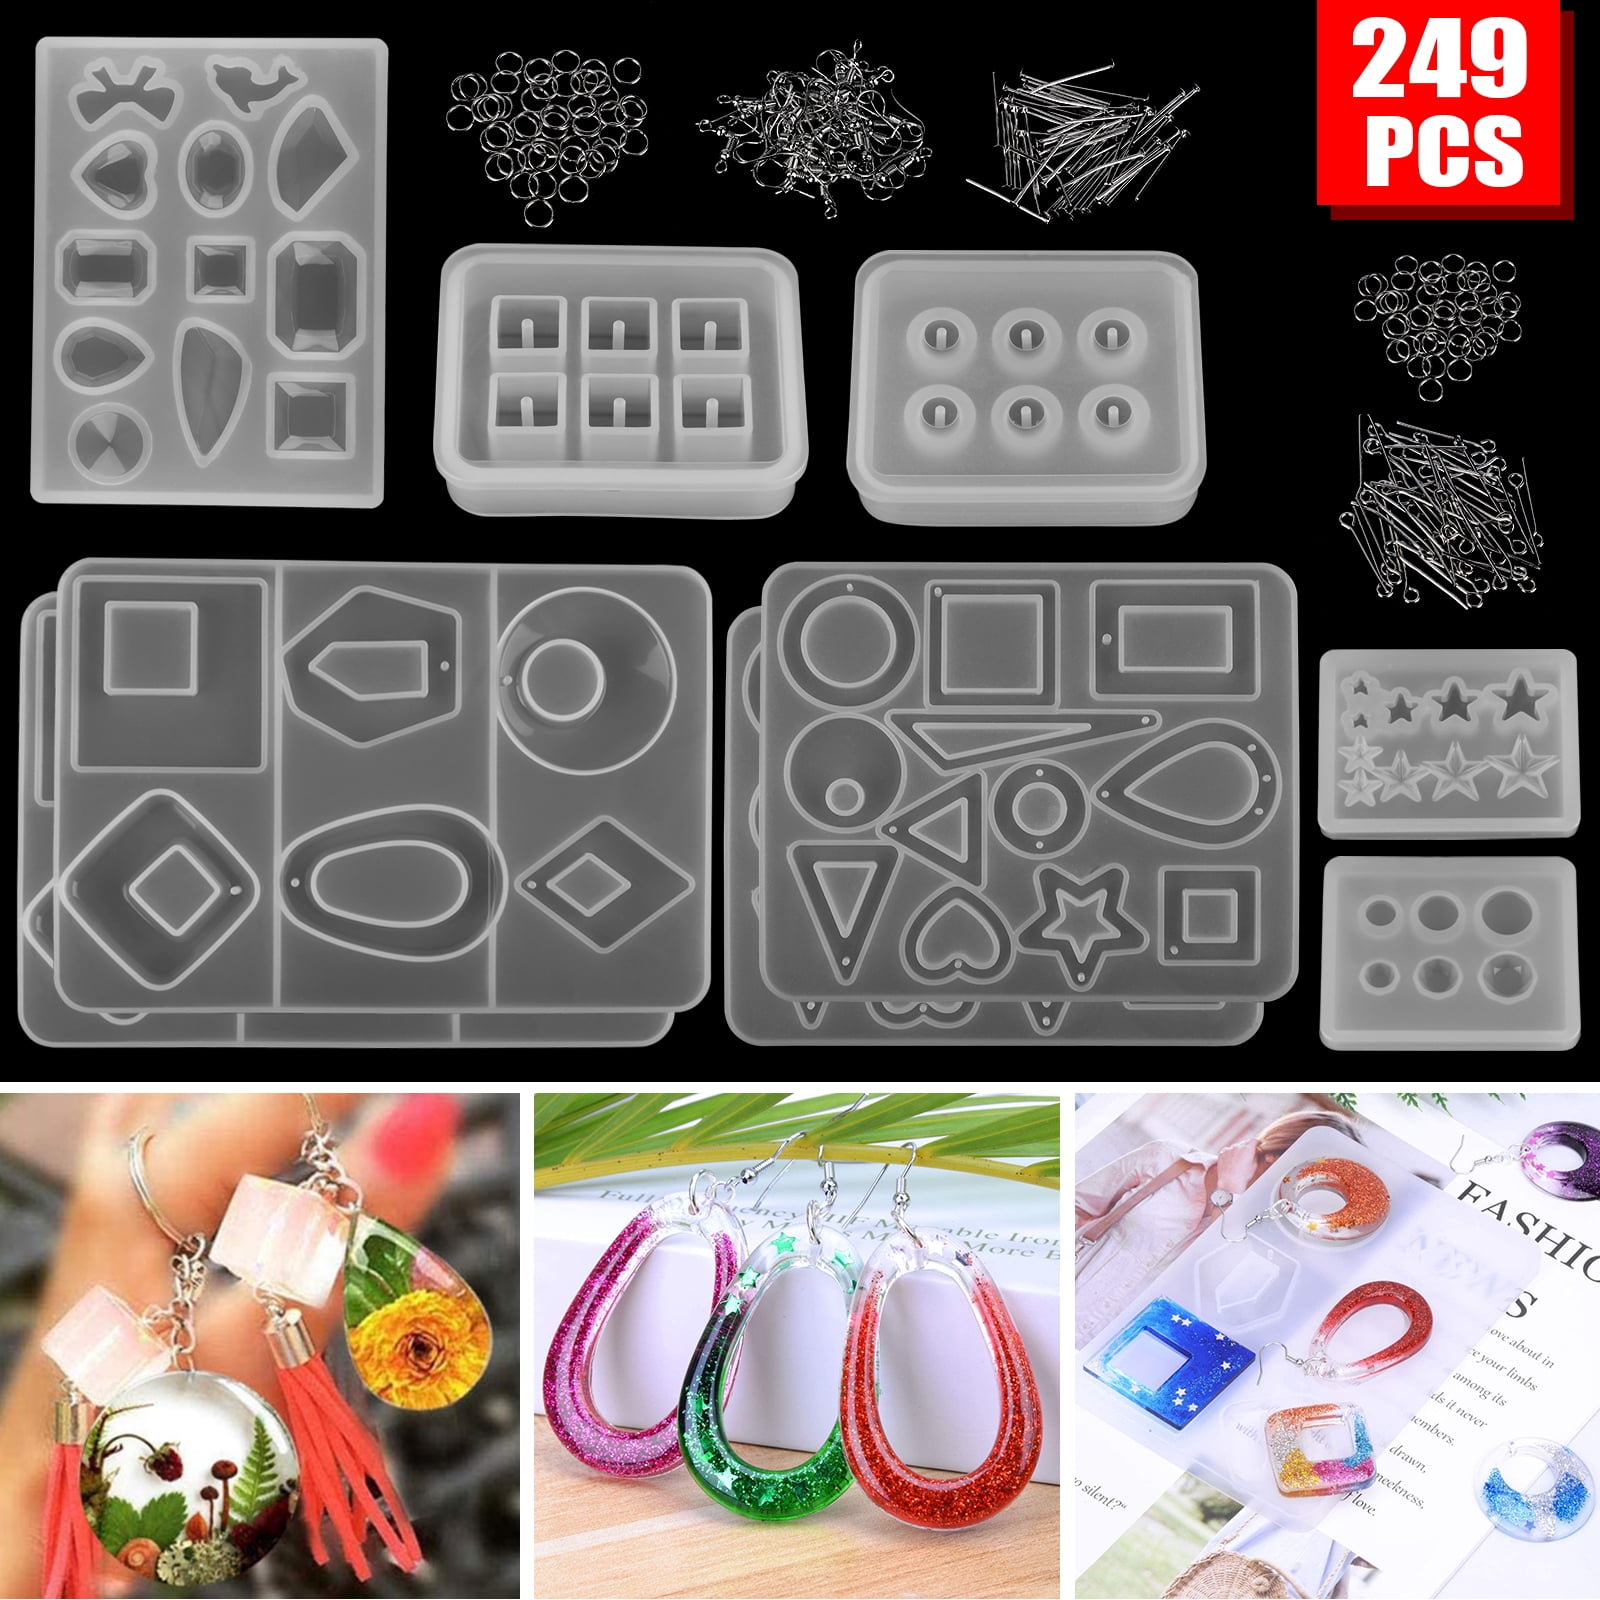 Resin Jewelry Silicone Molds Tools Set Uv Epoxy Resin Moulds Jewelry Making Diy